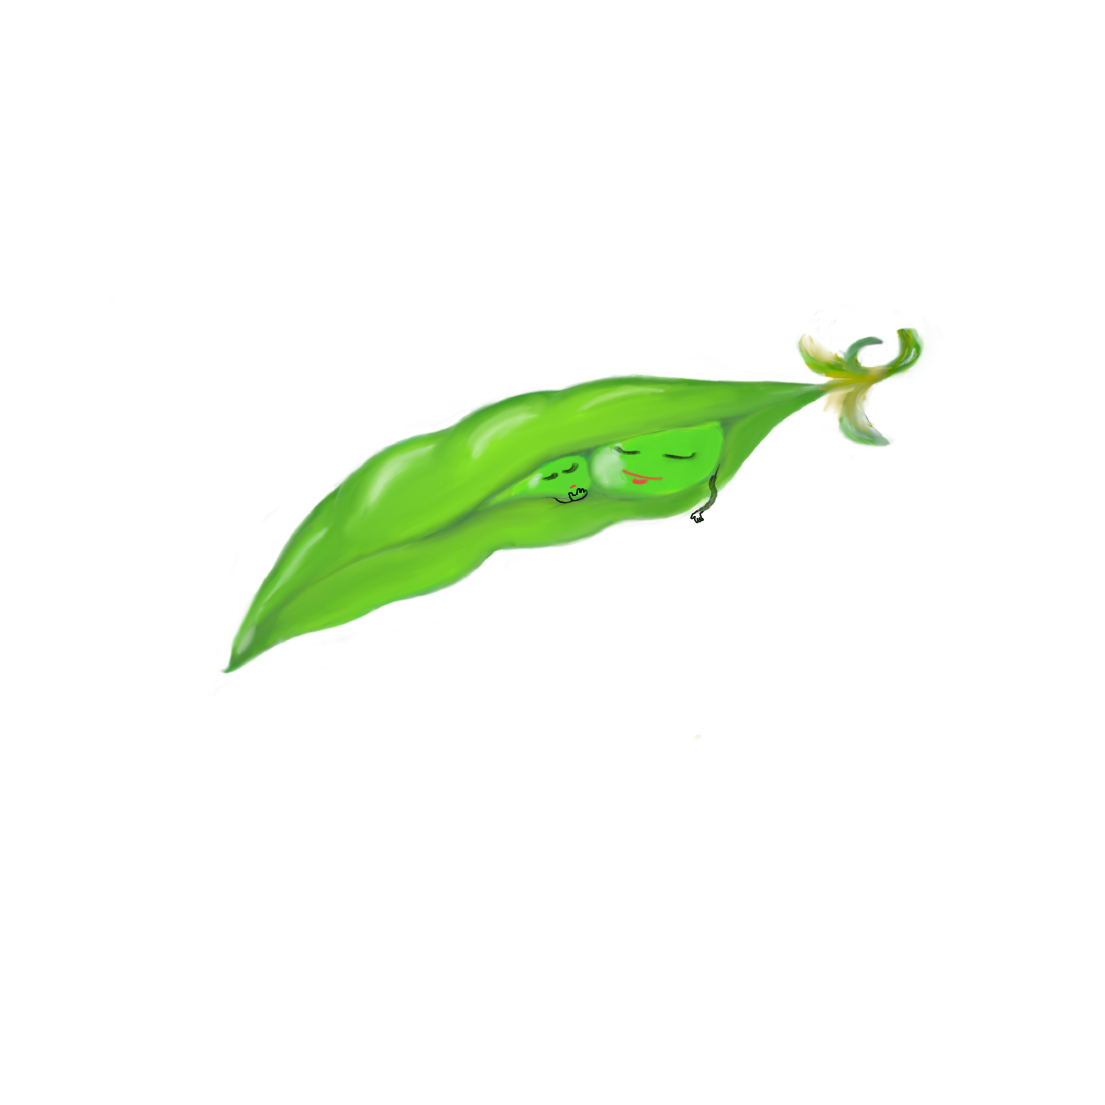 Green pea preview image.